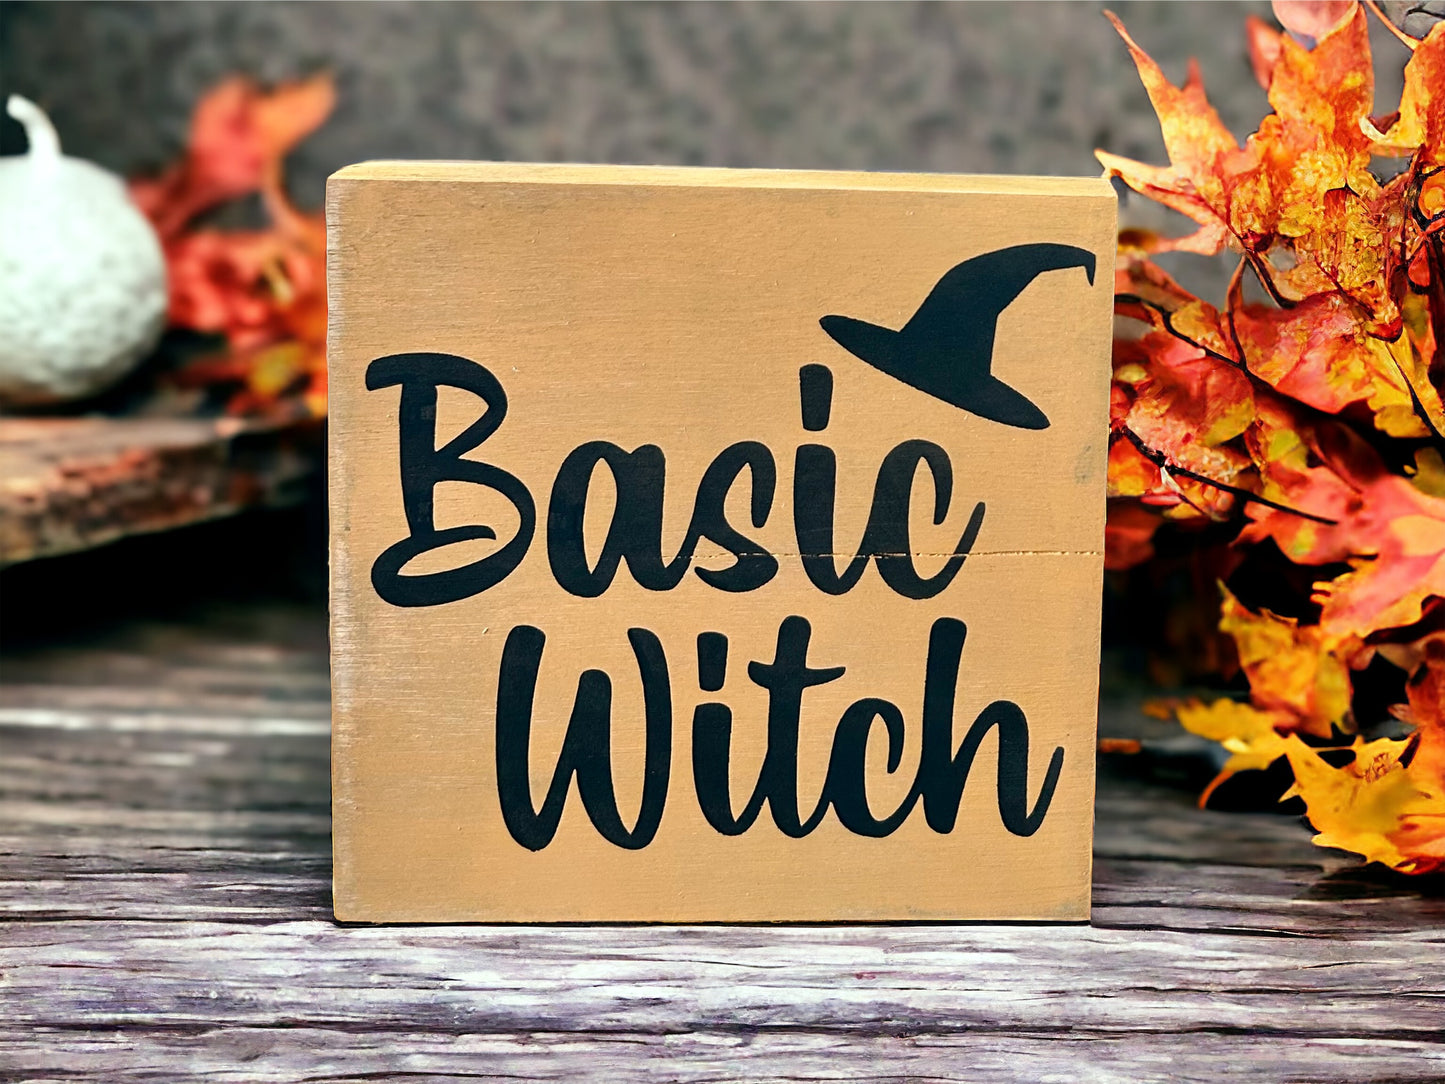 "Basic witch" wood sign